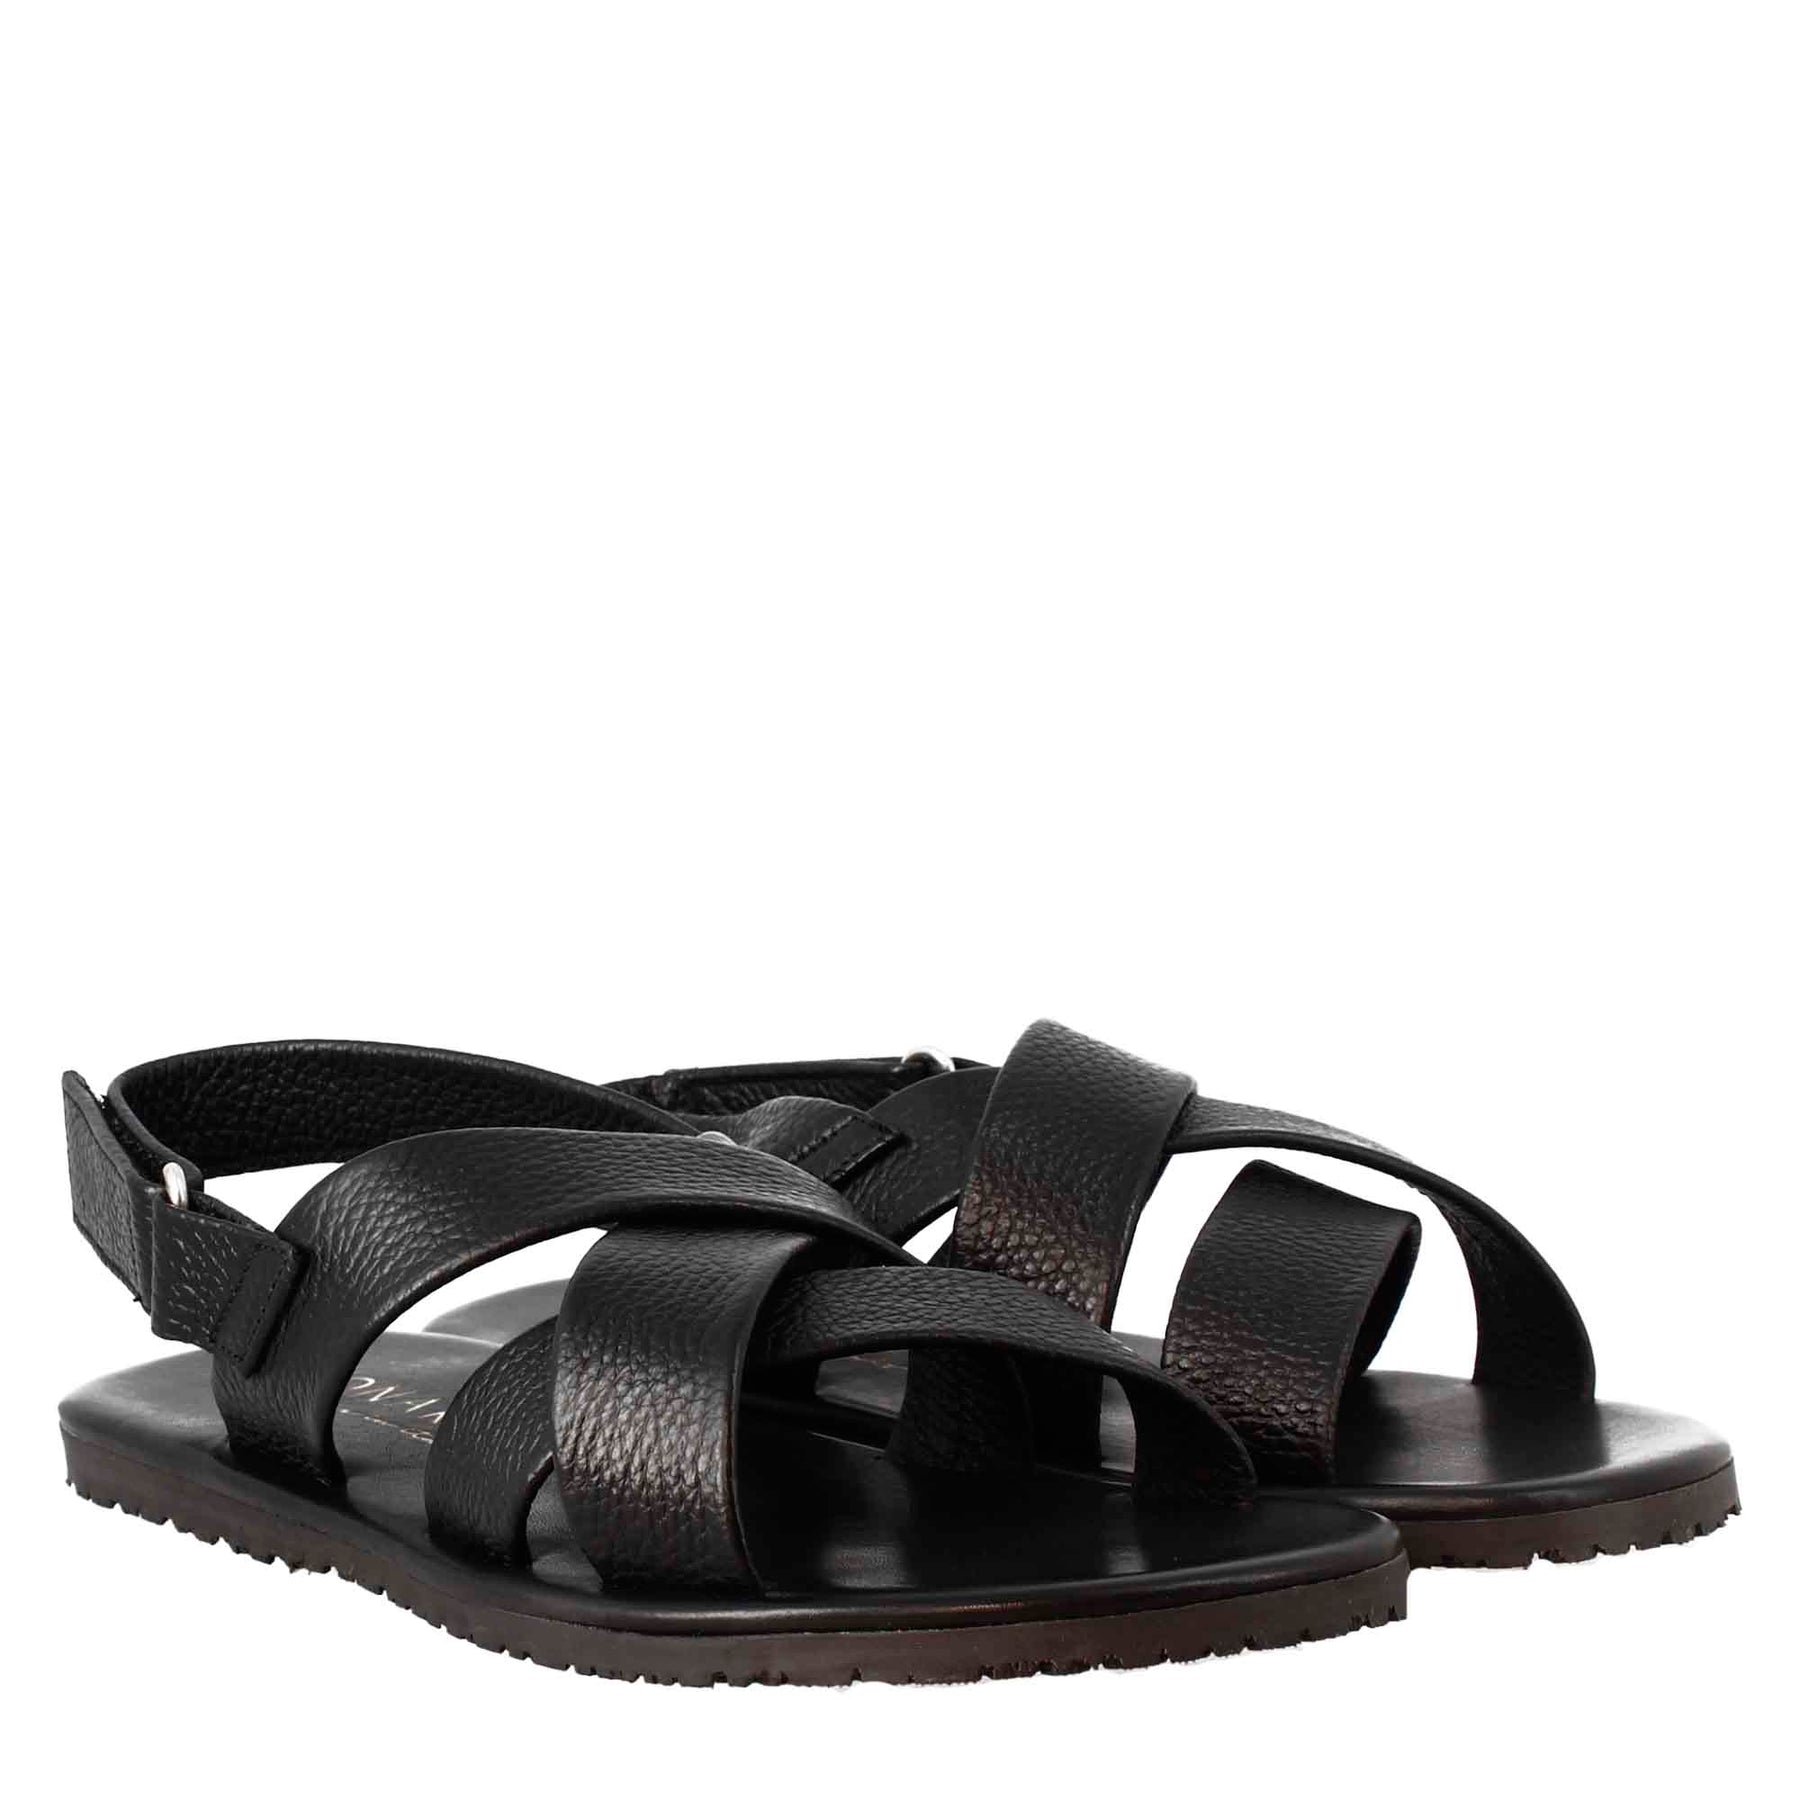 Handmade men's sandals in black leather with velcro closure